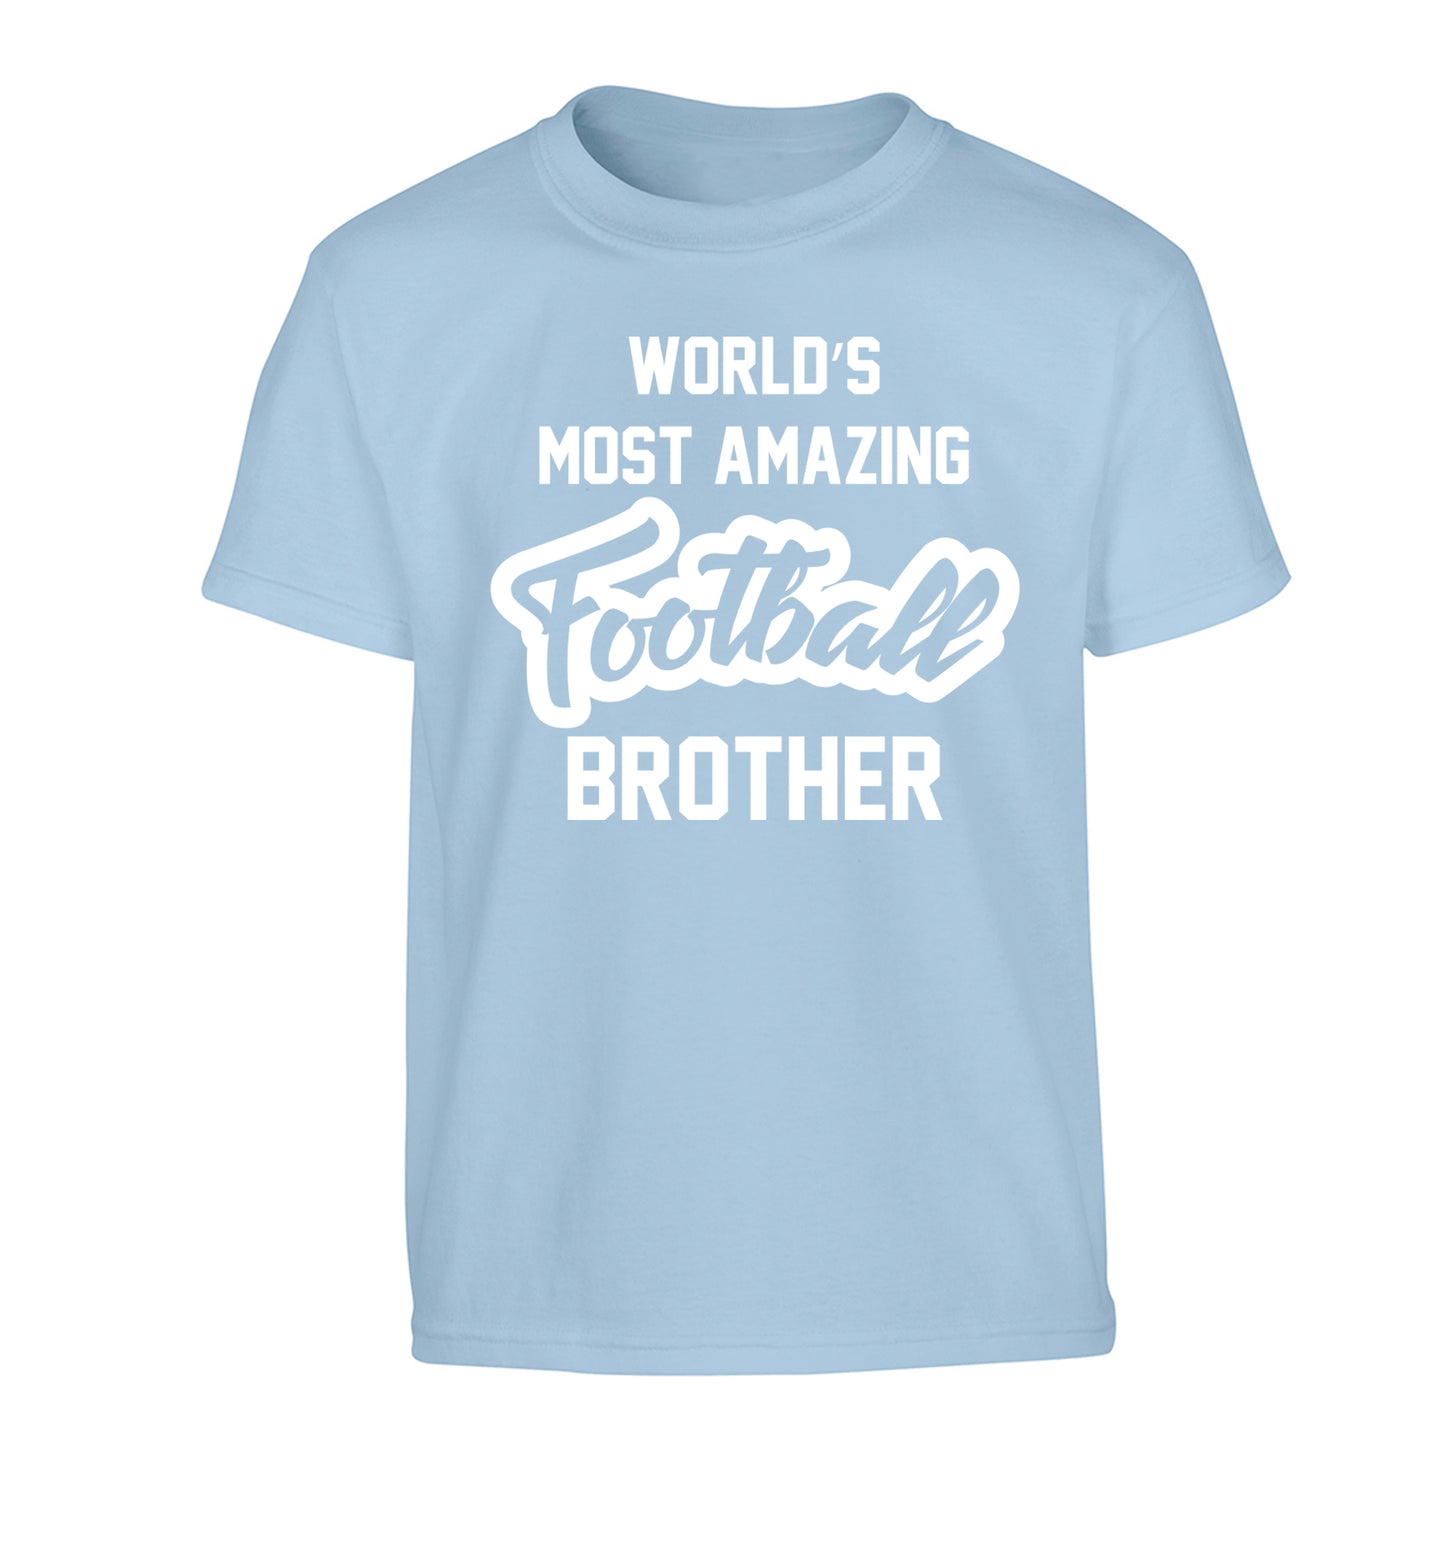 Worlds most amazing football brother Children's light blue Tshirt 12-14 Years